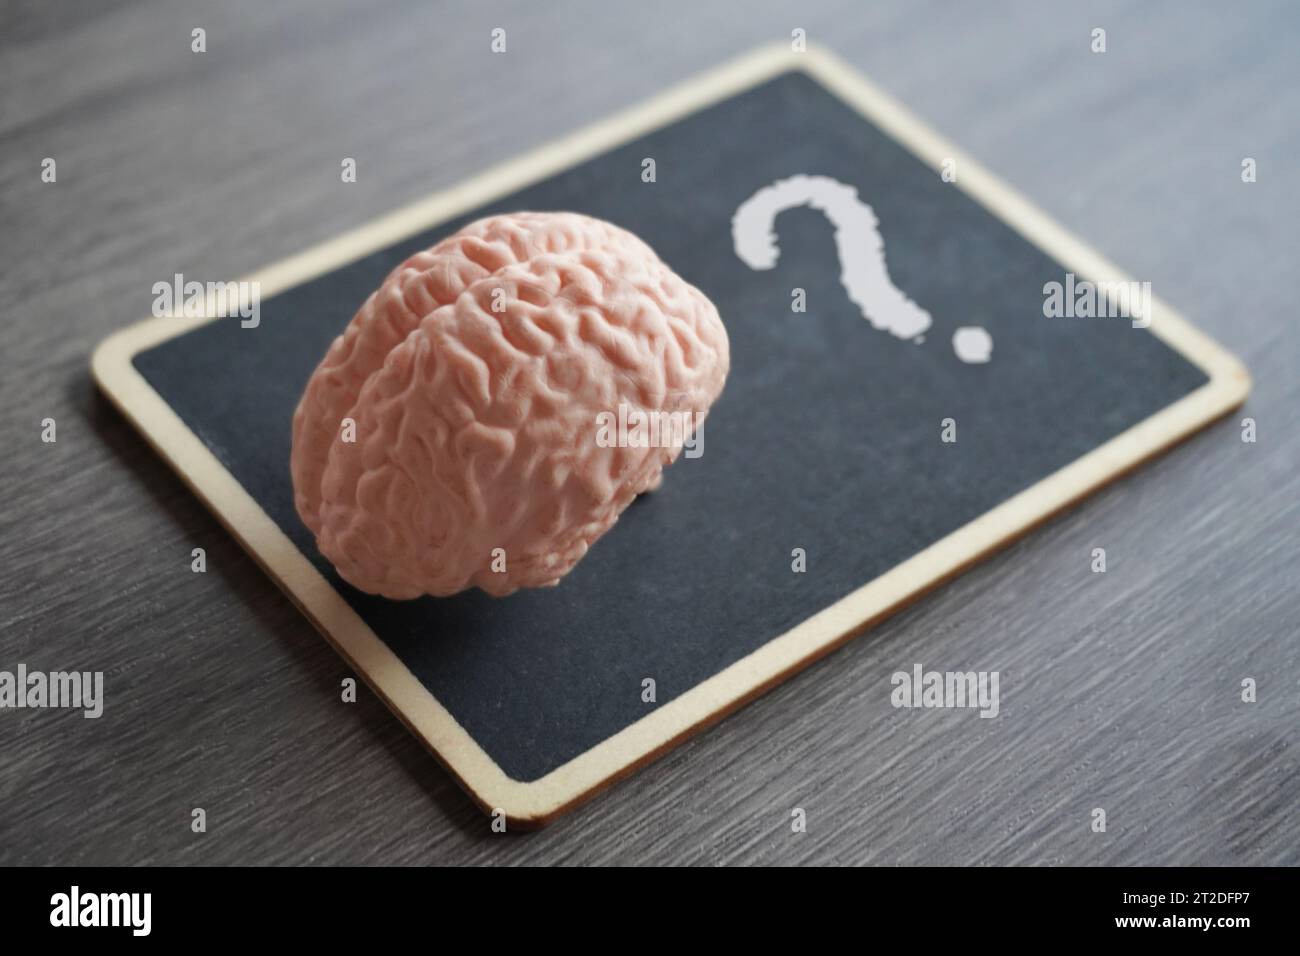 Human brain model on top of a blackboard with a question mark. Knowledge, critical thinking concept. Stock Photo